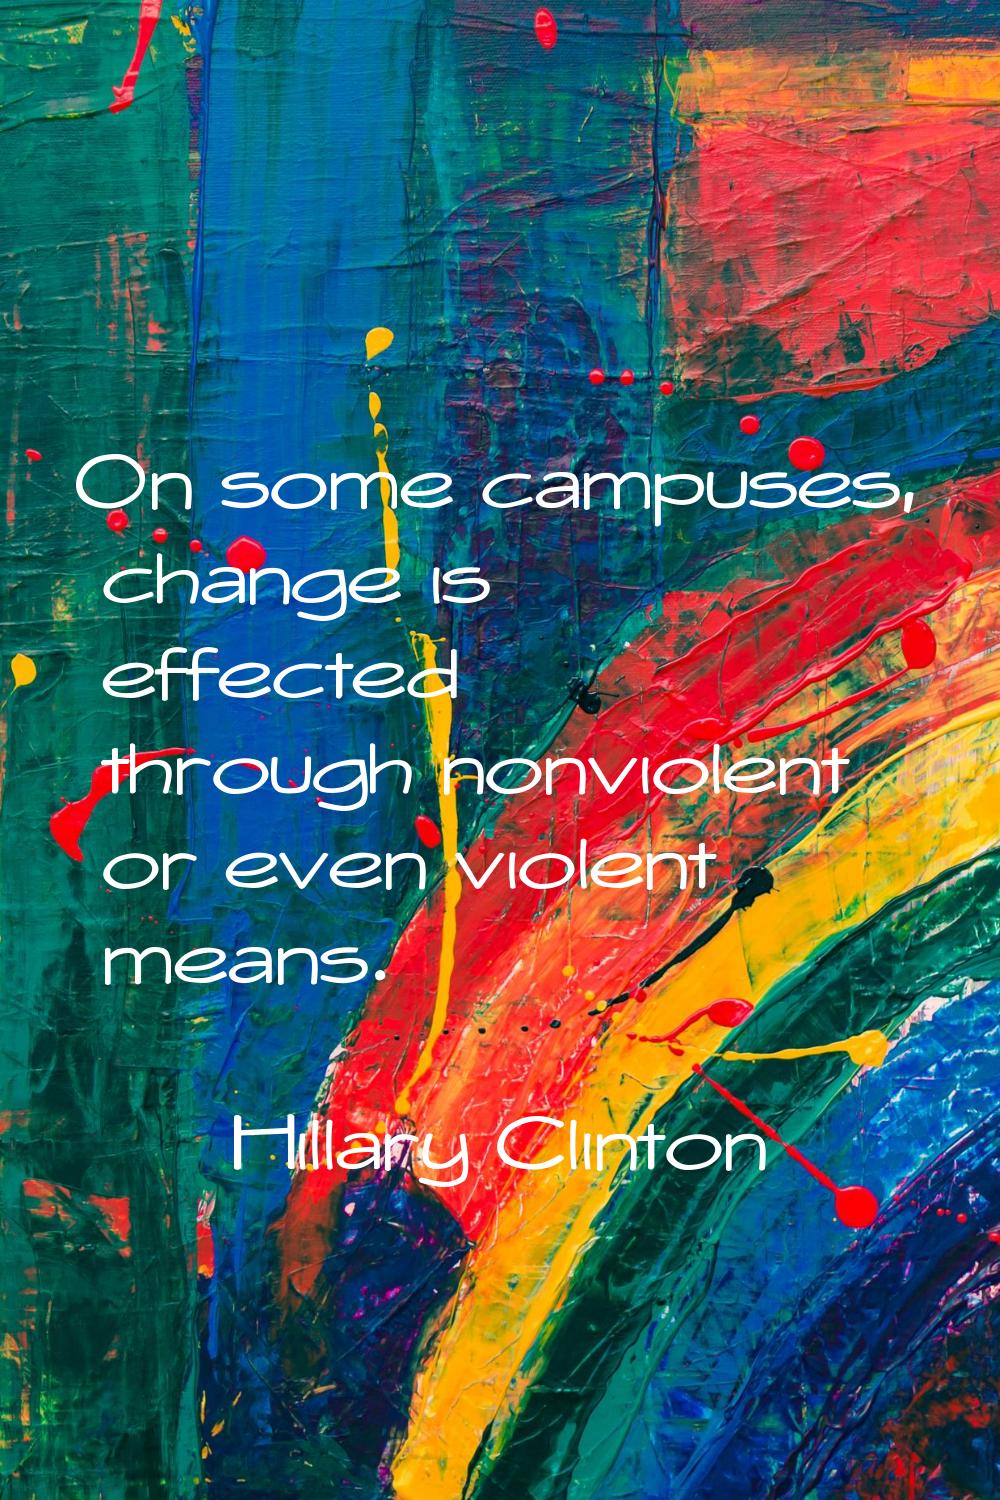 On some campuses, change is effected through nonviolent or even violent means.